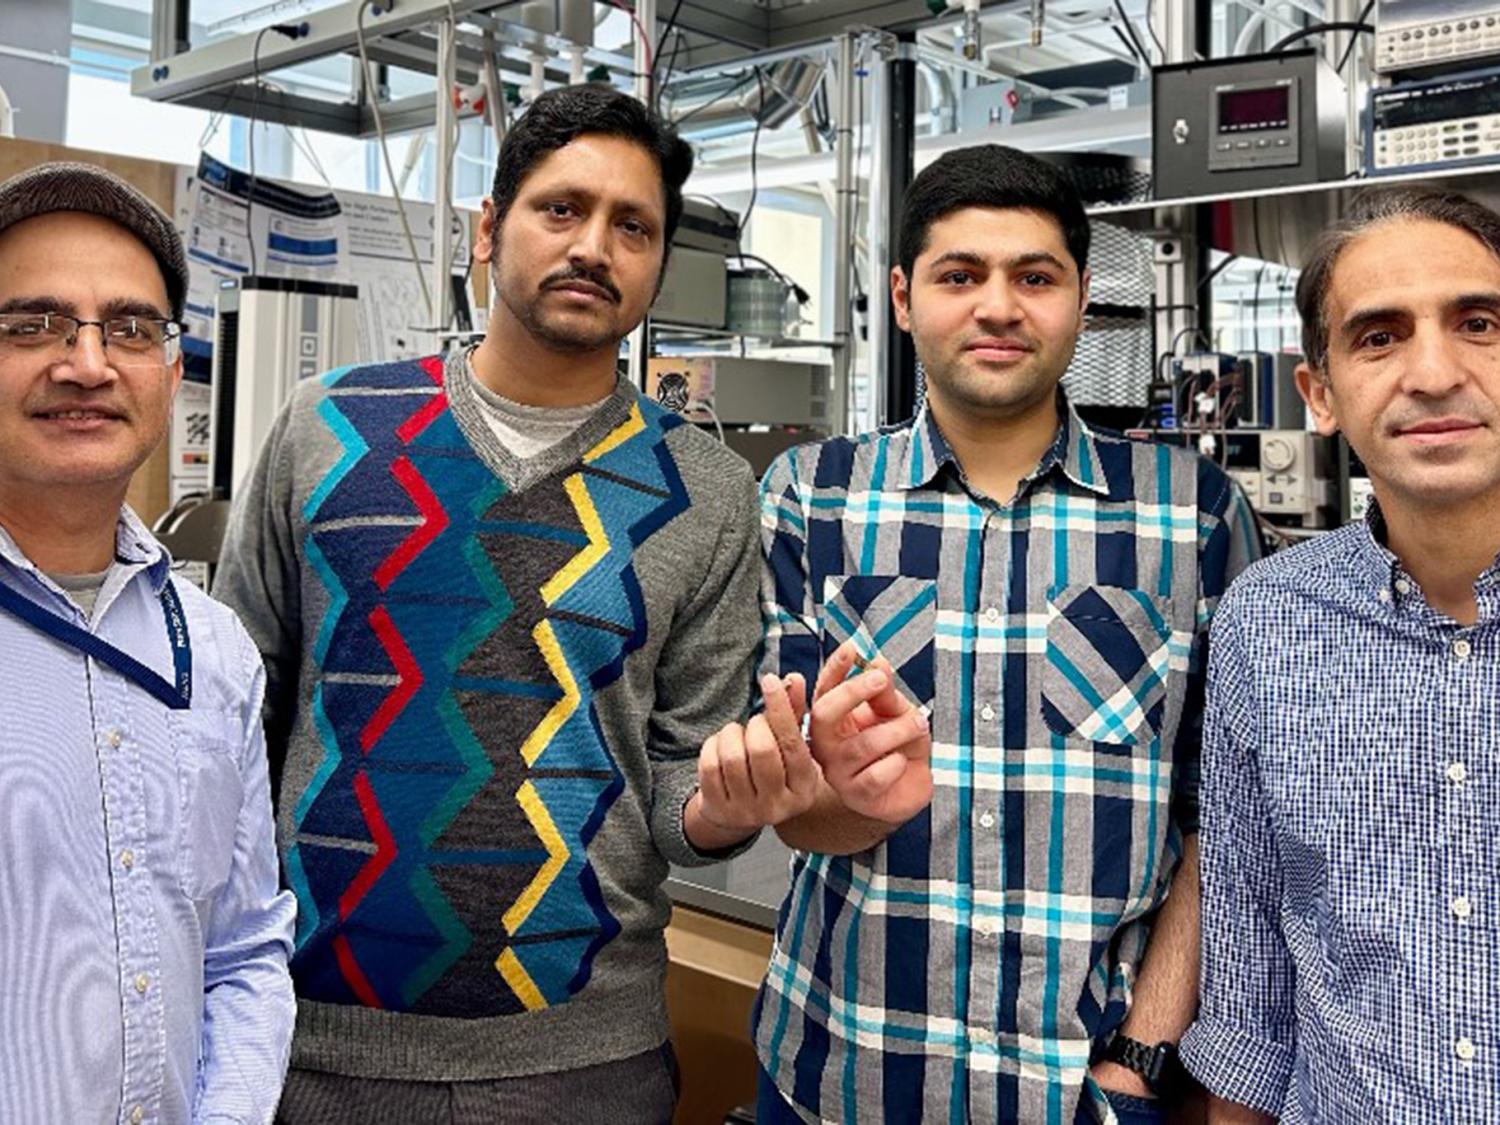 Penn State researchers show a new device that can harvest energy from magnetic field and ultrasound sources simultaneously, converting this energy to electricity that could power the next generation of implantable biomedical devices. 